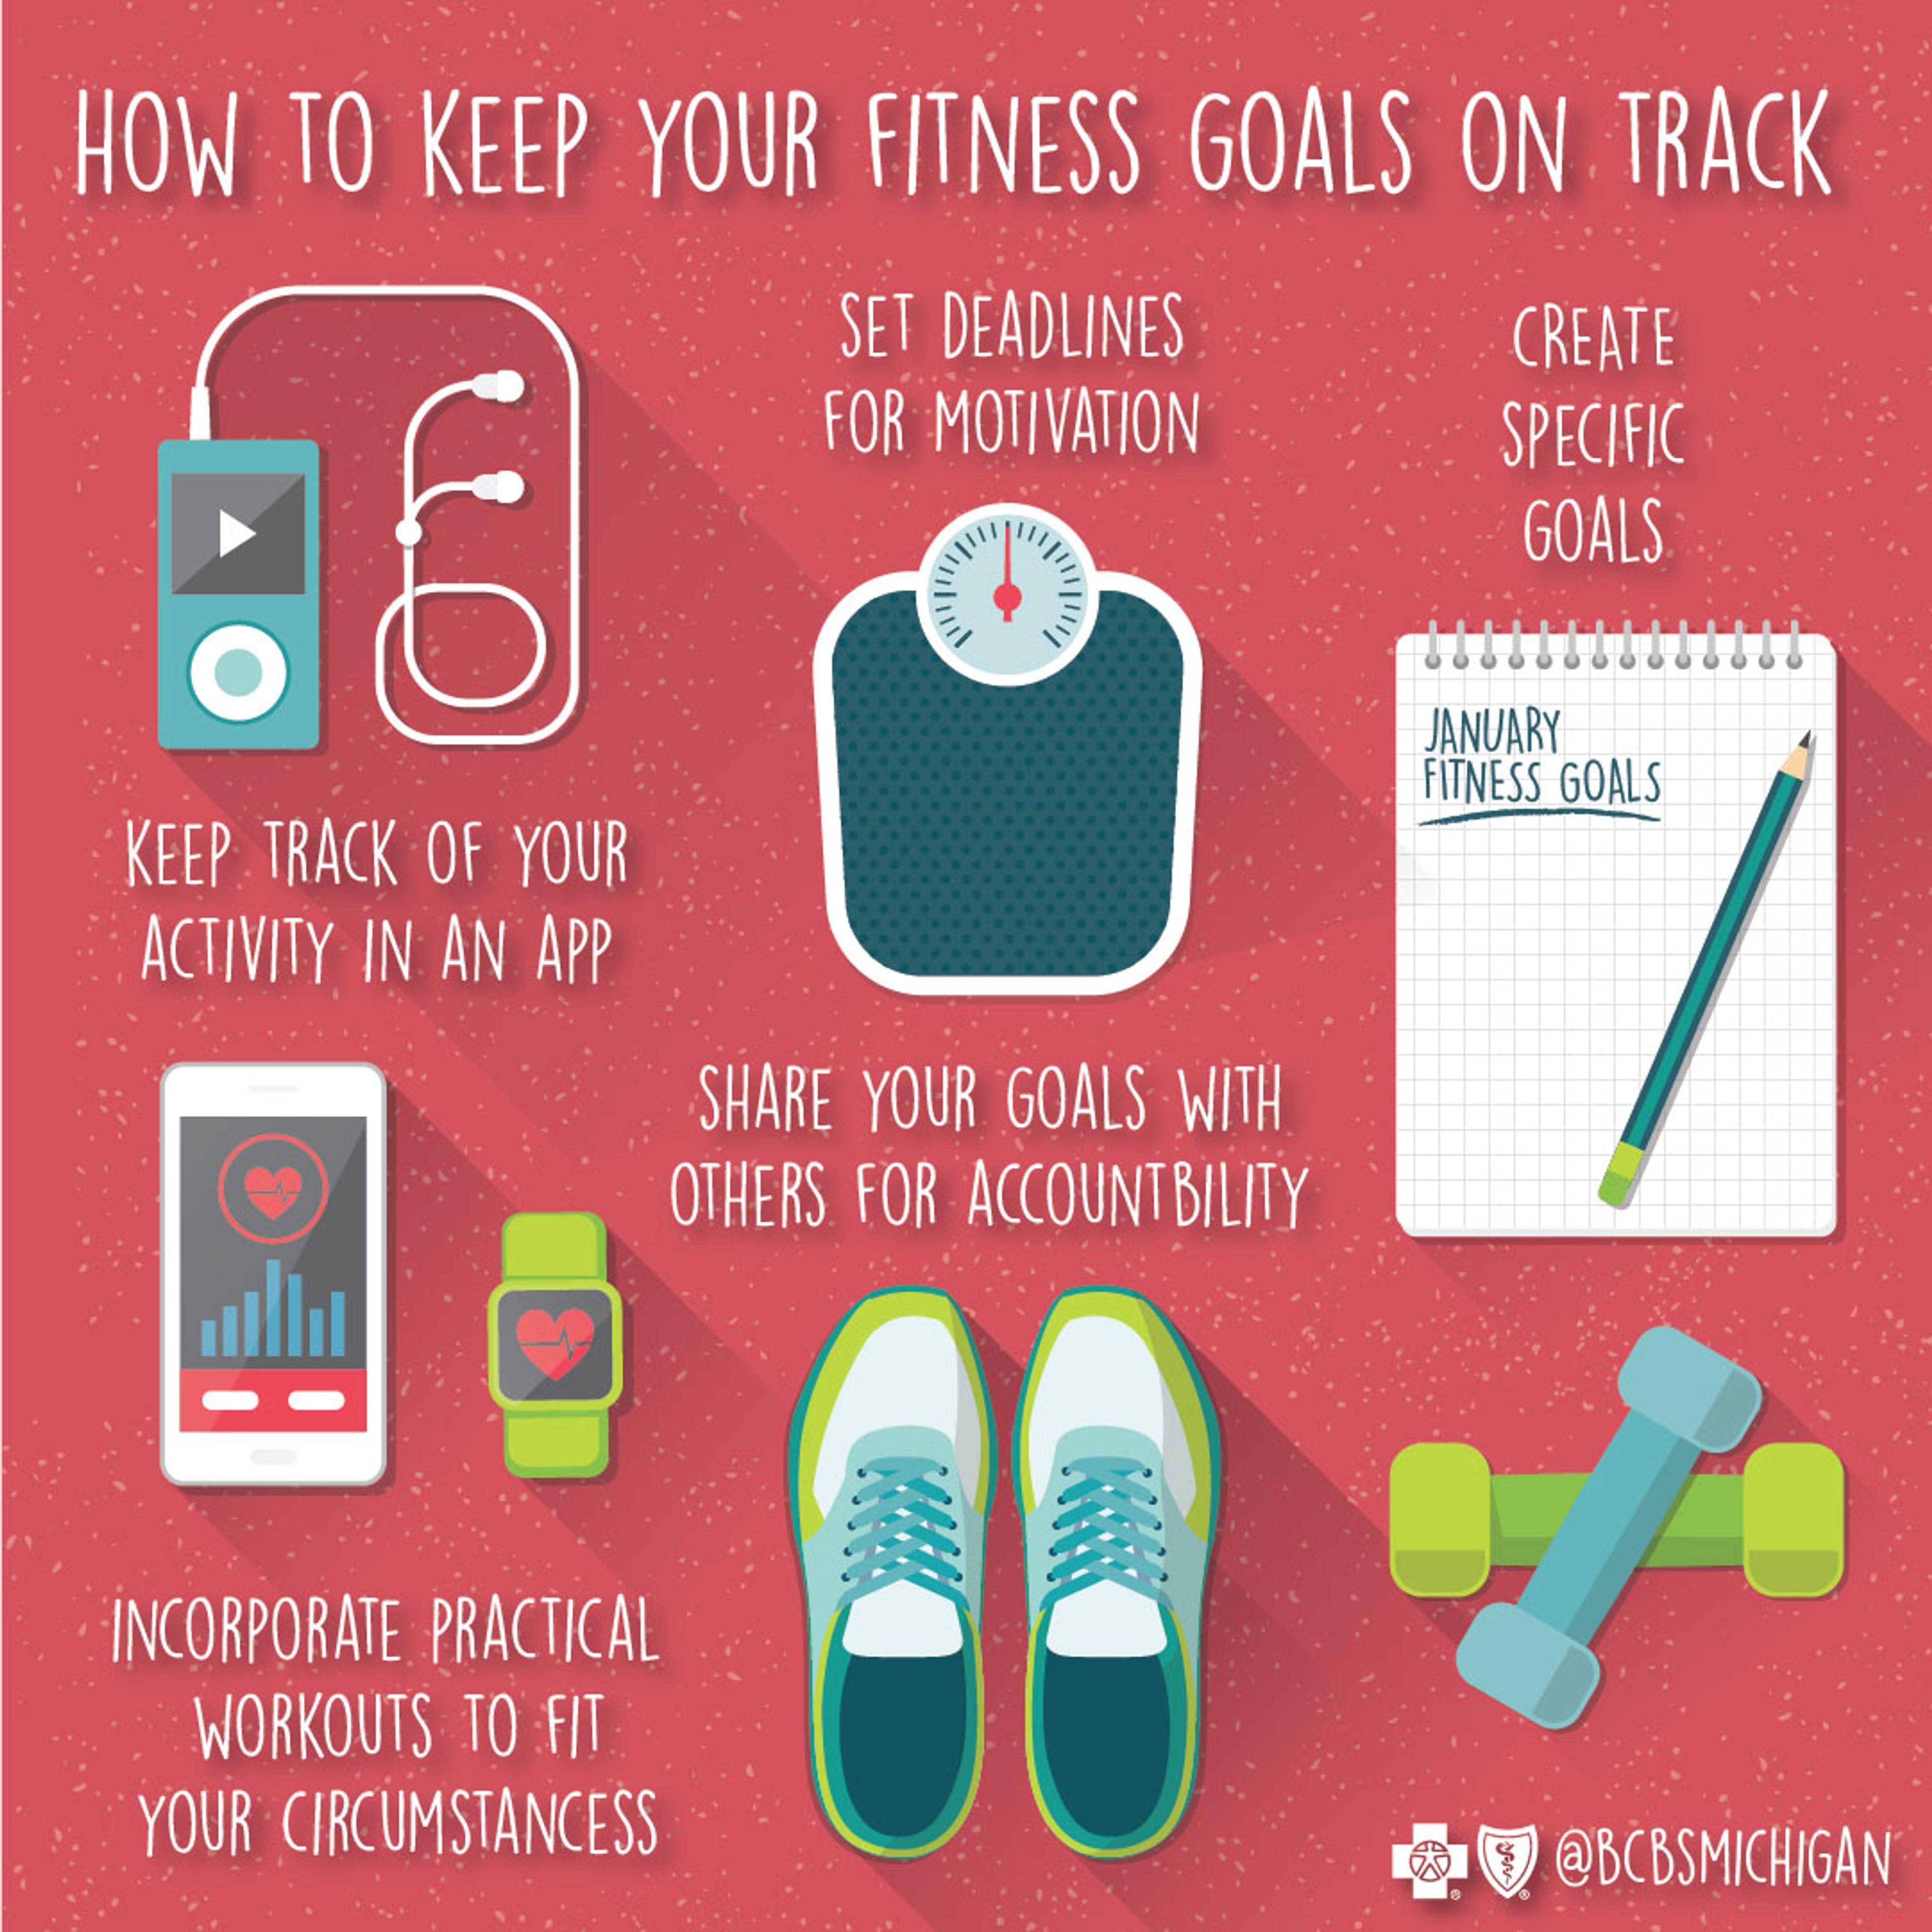 Your Answers: What are your fitness goals?